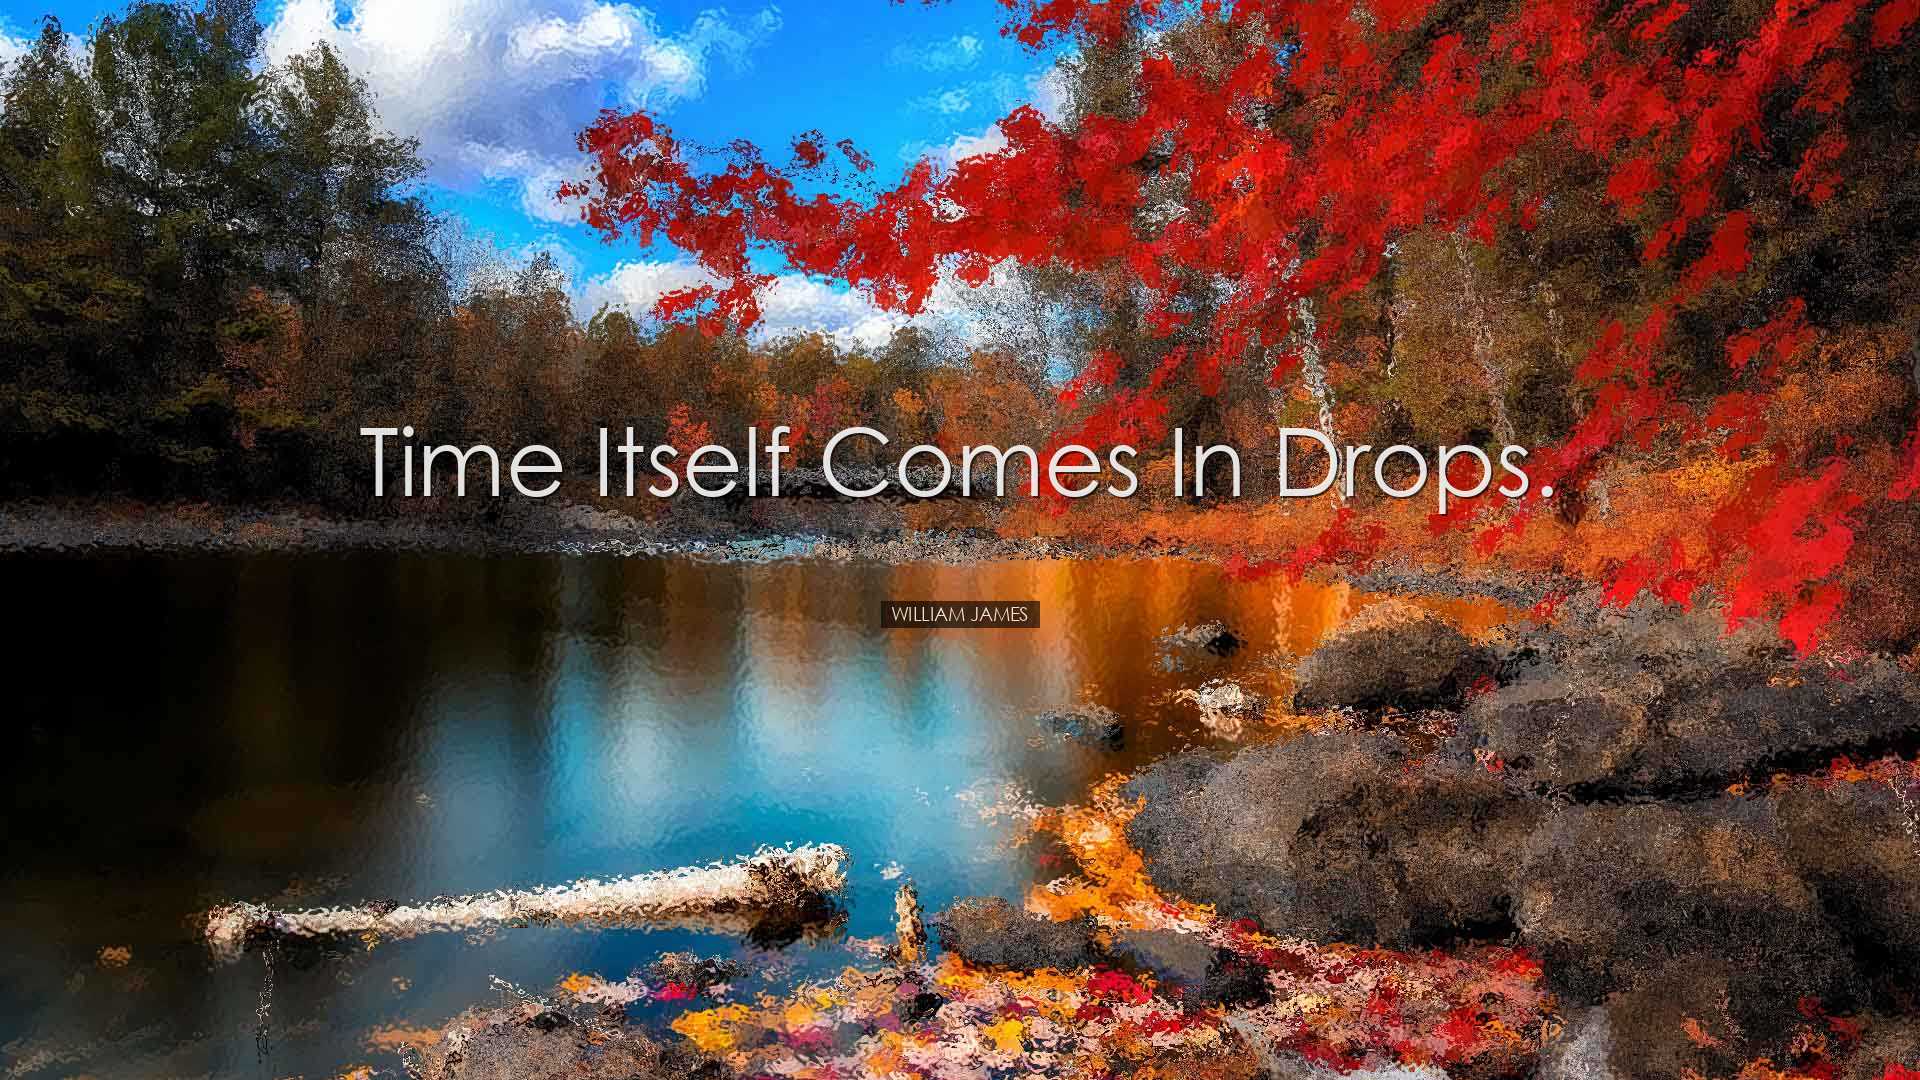 Time itself comes in drops. - William James